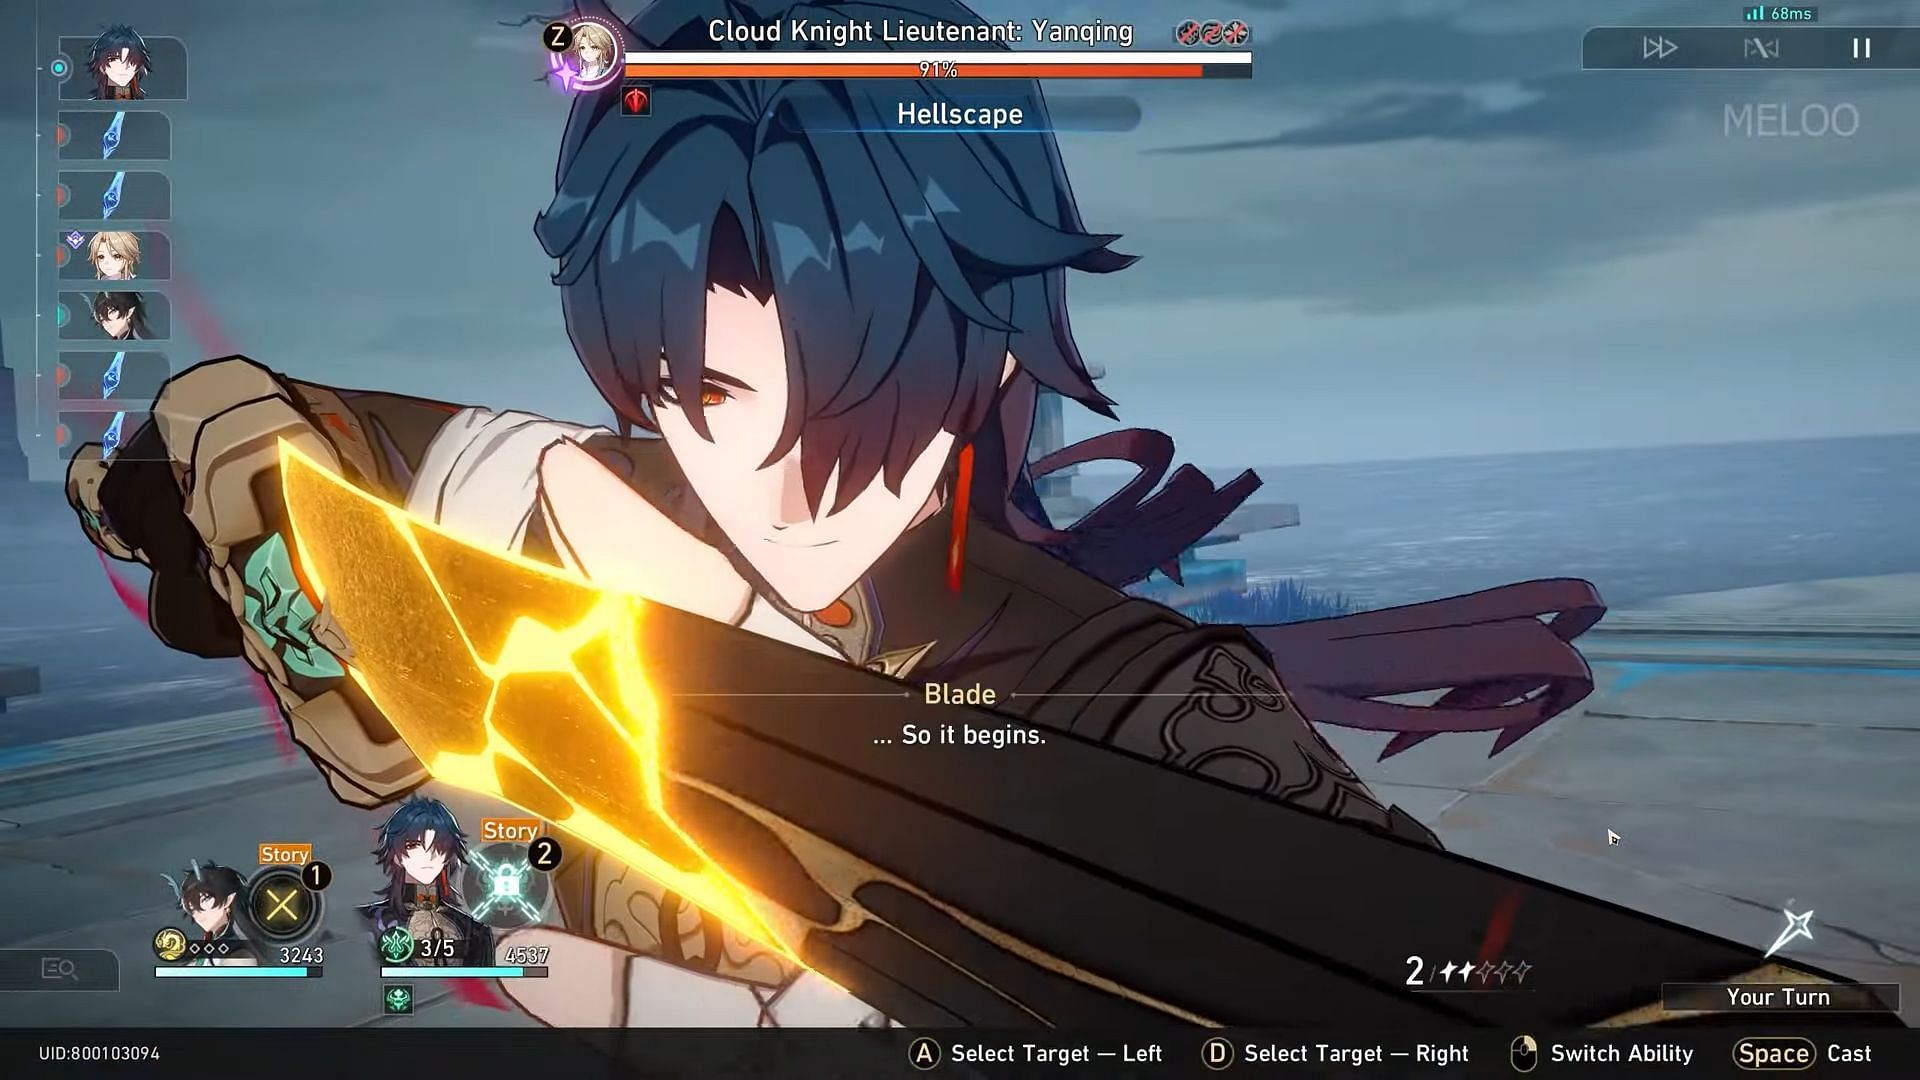 Blade charges his Skill mid-battle (Image via YouTube/MELOO)